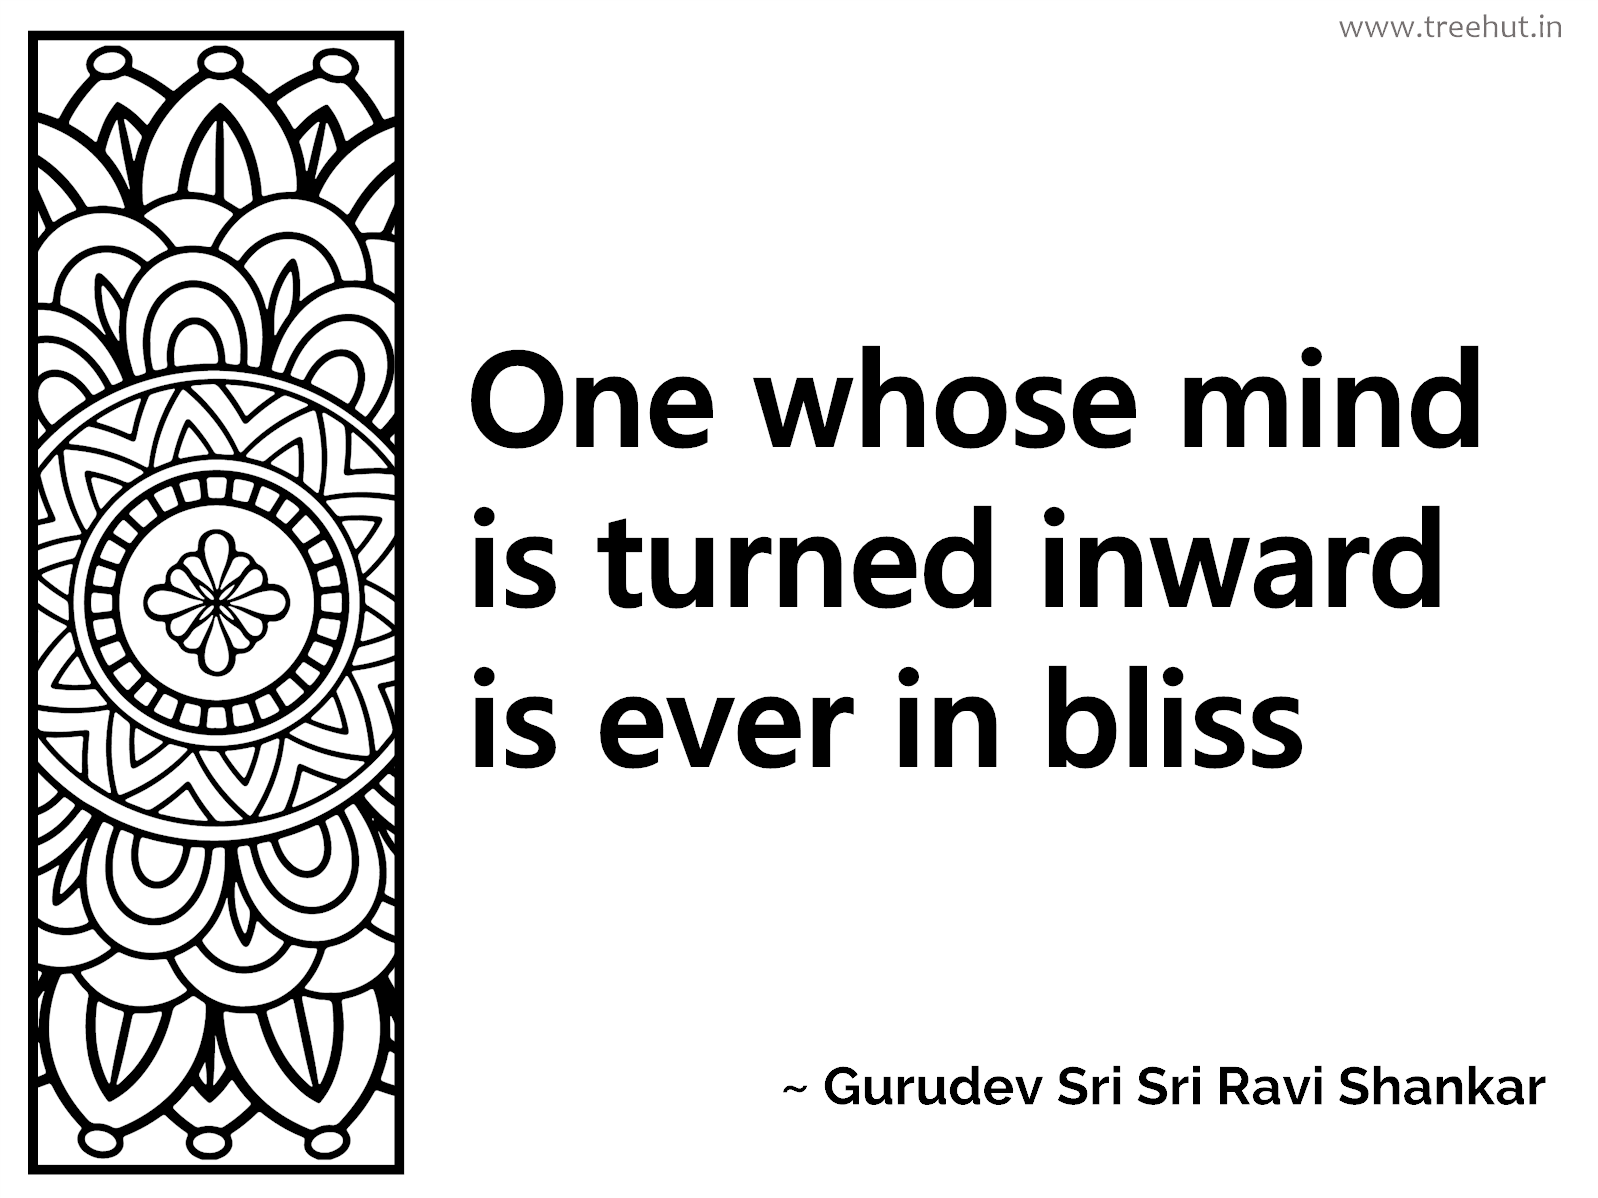 One whose mind is turned inward is ever in bliss Inspirational Quote by Gurudev Sri Sri Ravi Shankar, coloring pages